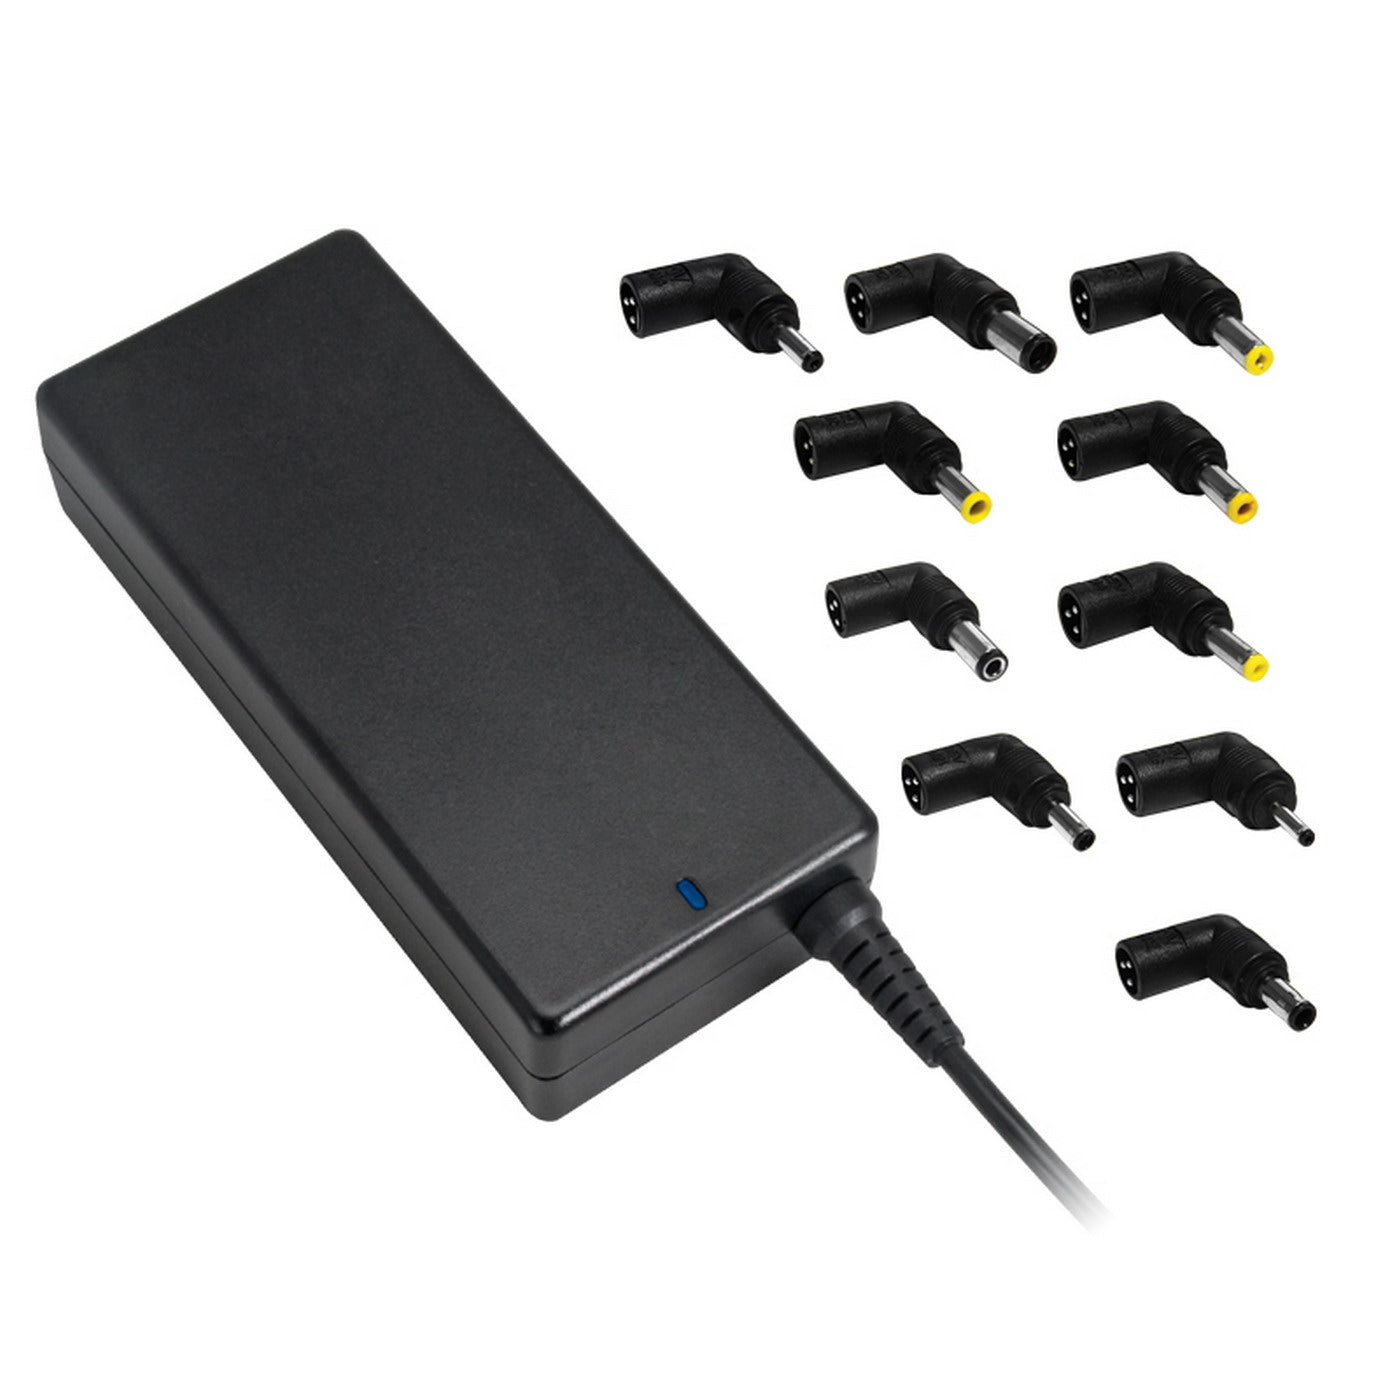 Alcapower Universal adapter, 90W charger, universal notebook power supply, laptop power supply, universal charger